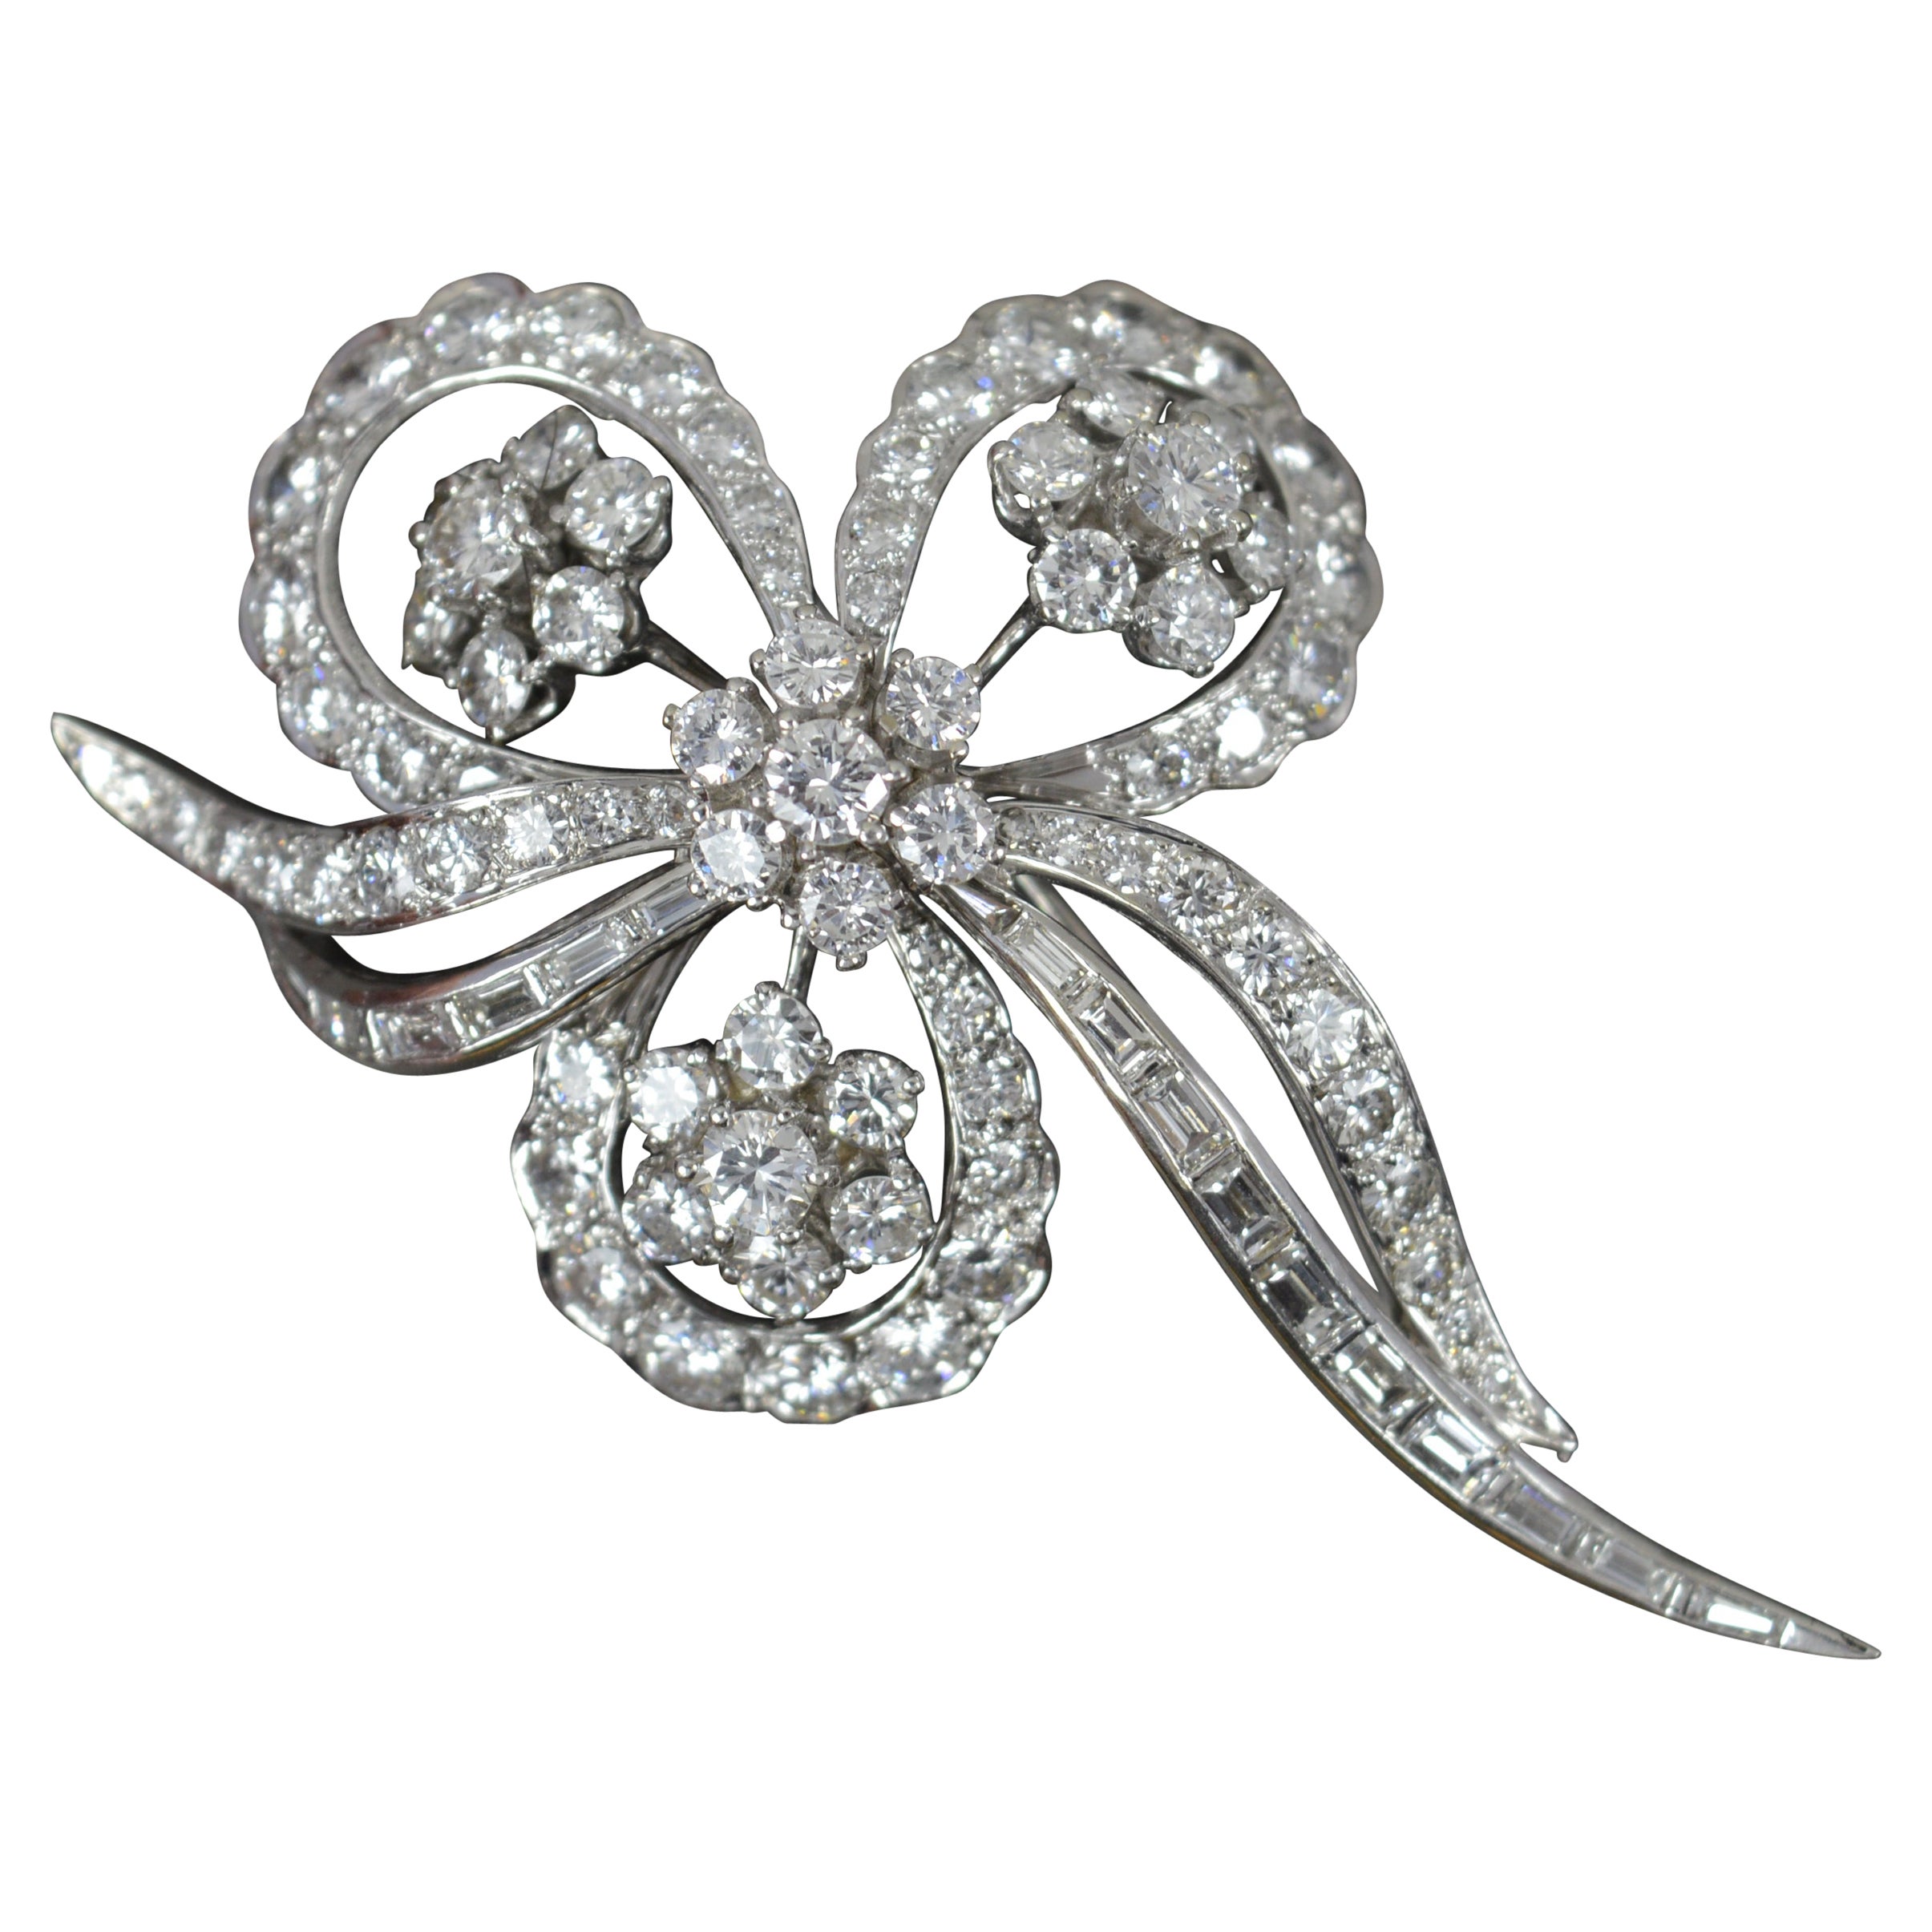 5.5ct Vs Diamond 18ct White Gold Flower Floral Spray Brooch For Sale